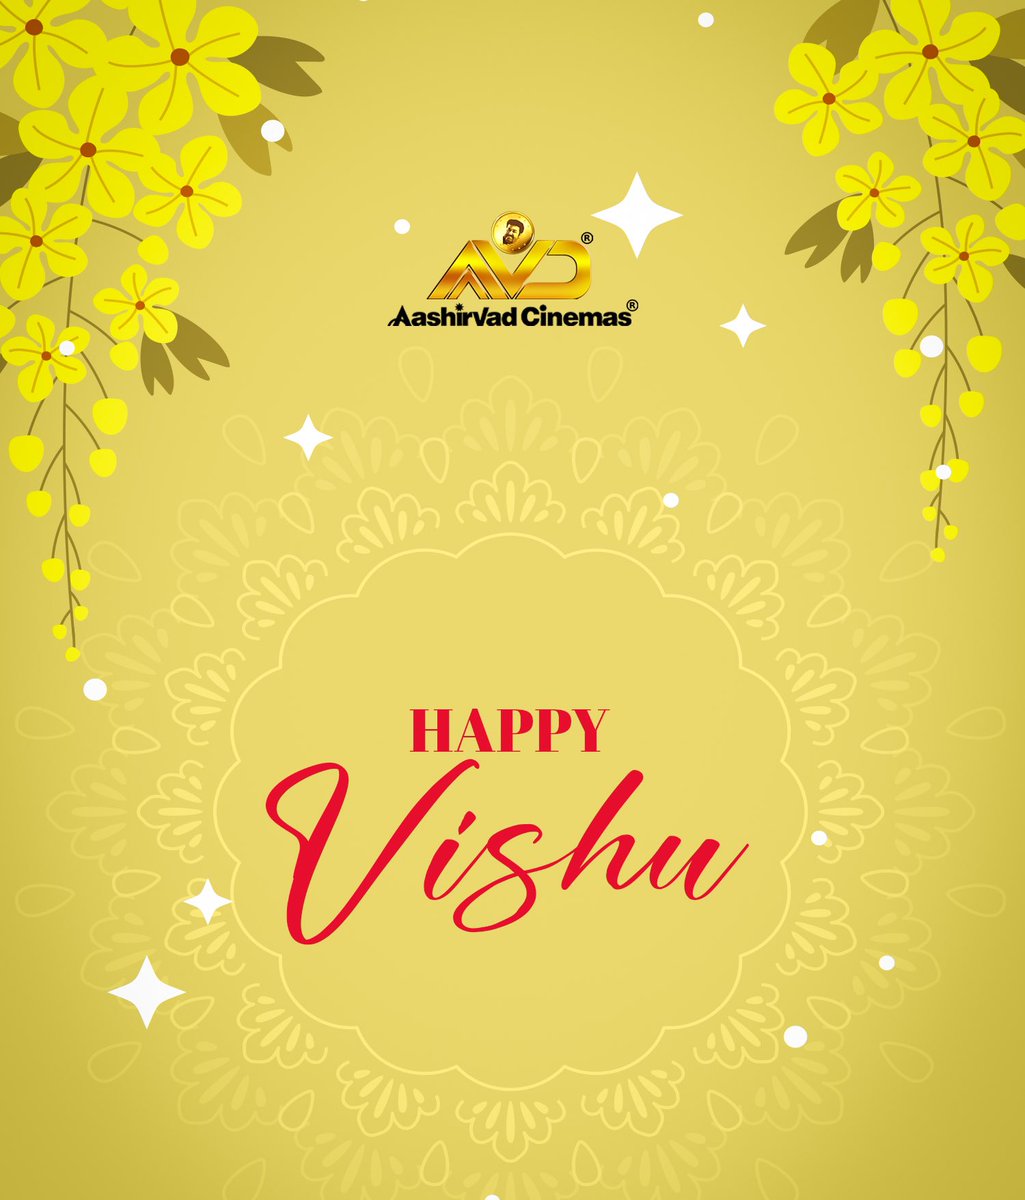 'Wishing everyone a joyous and prosperous Vishu! May this year be filled with happiness and abundance for all. #HappyVishu'